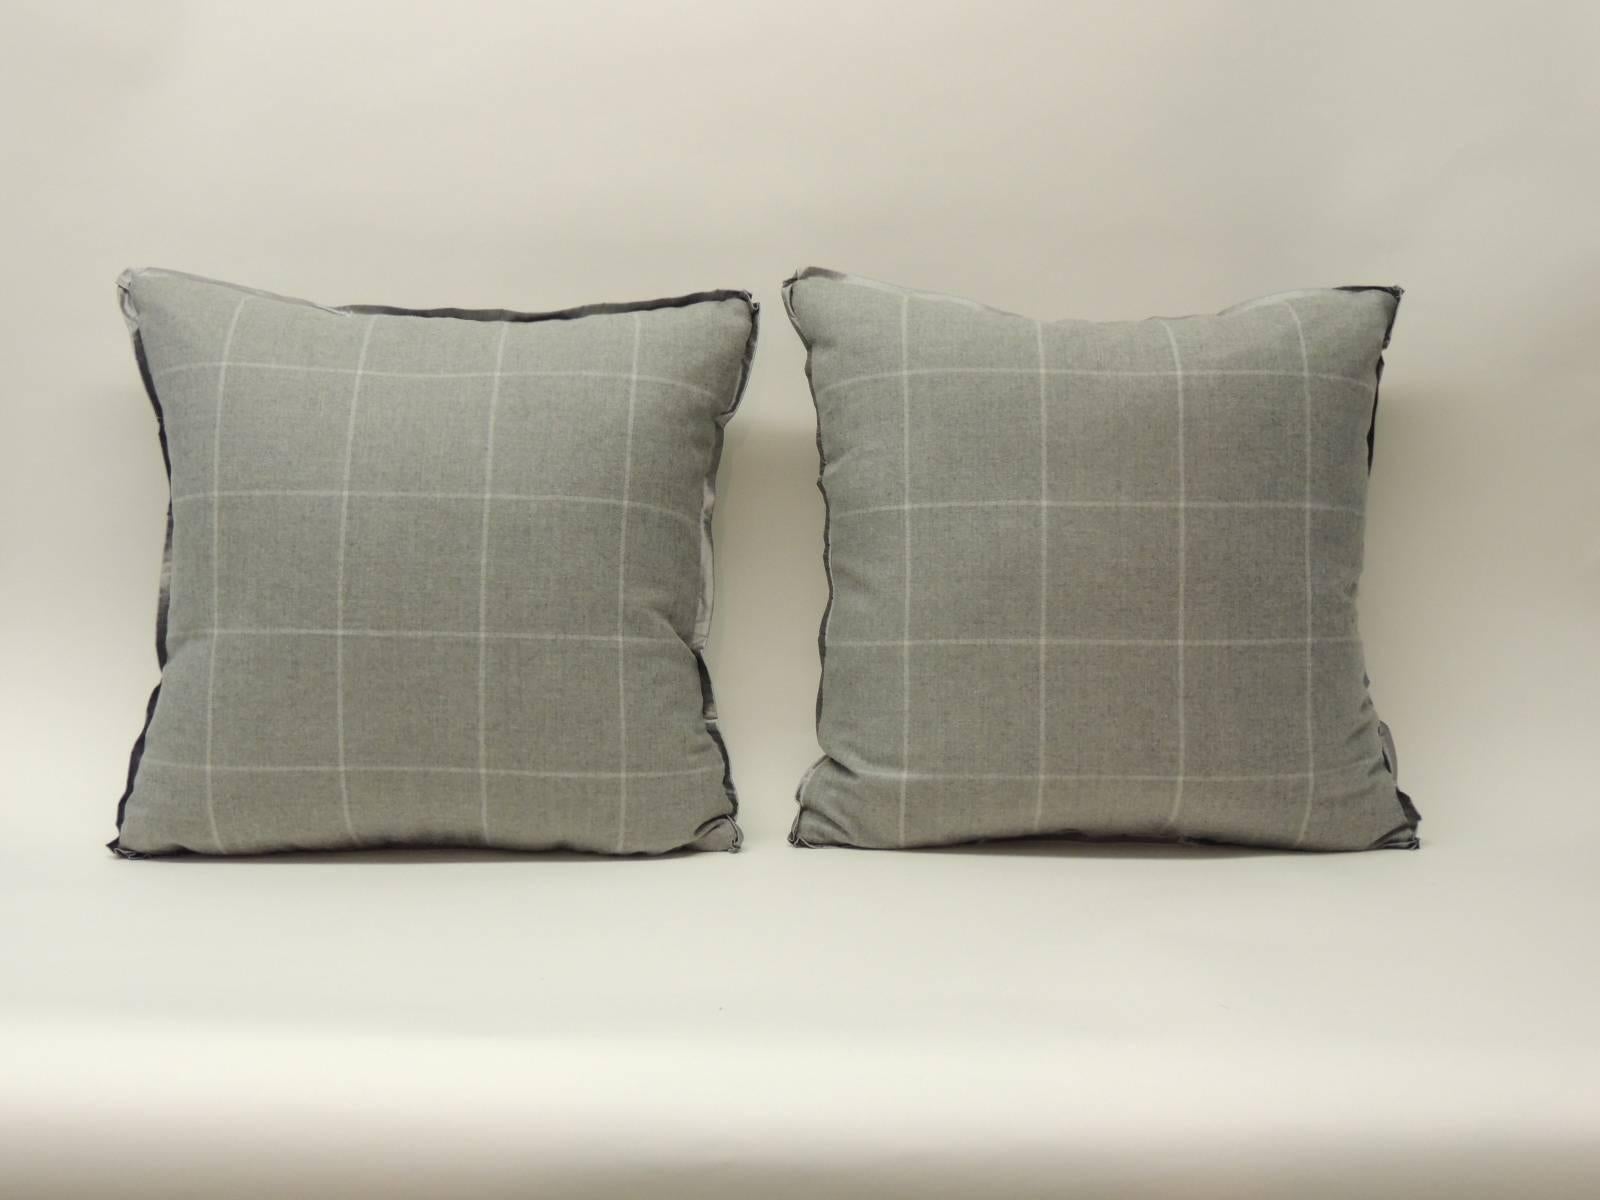 Antique Textiles Galleries:
Pair of vintage Gray Loro Piana cashmere decorative pillows with silk flat trims. The front panel is in Glen Plaid style on heather gray and has been lined for reinforcement and durability. Loro Piana website describes